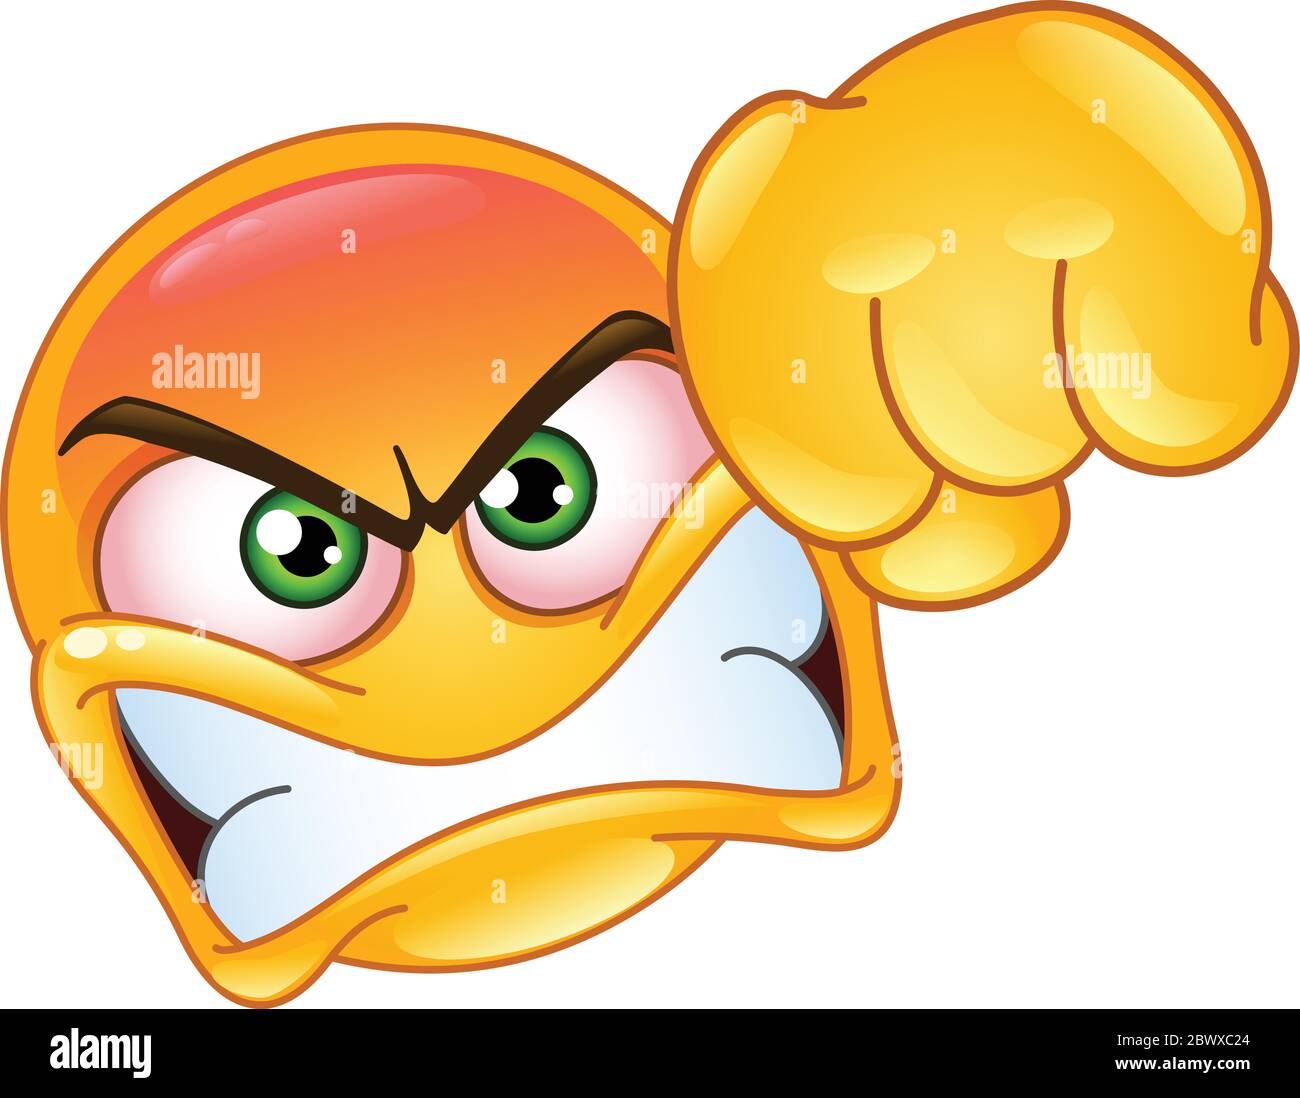 Angry Emoticon Images – Browse 132,176 Stock Photos, Vectors, and Video